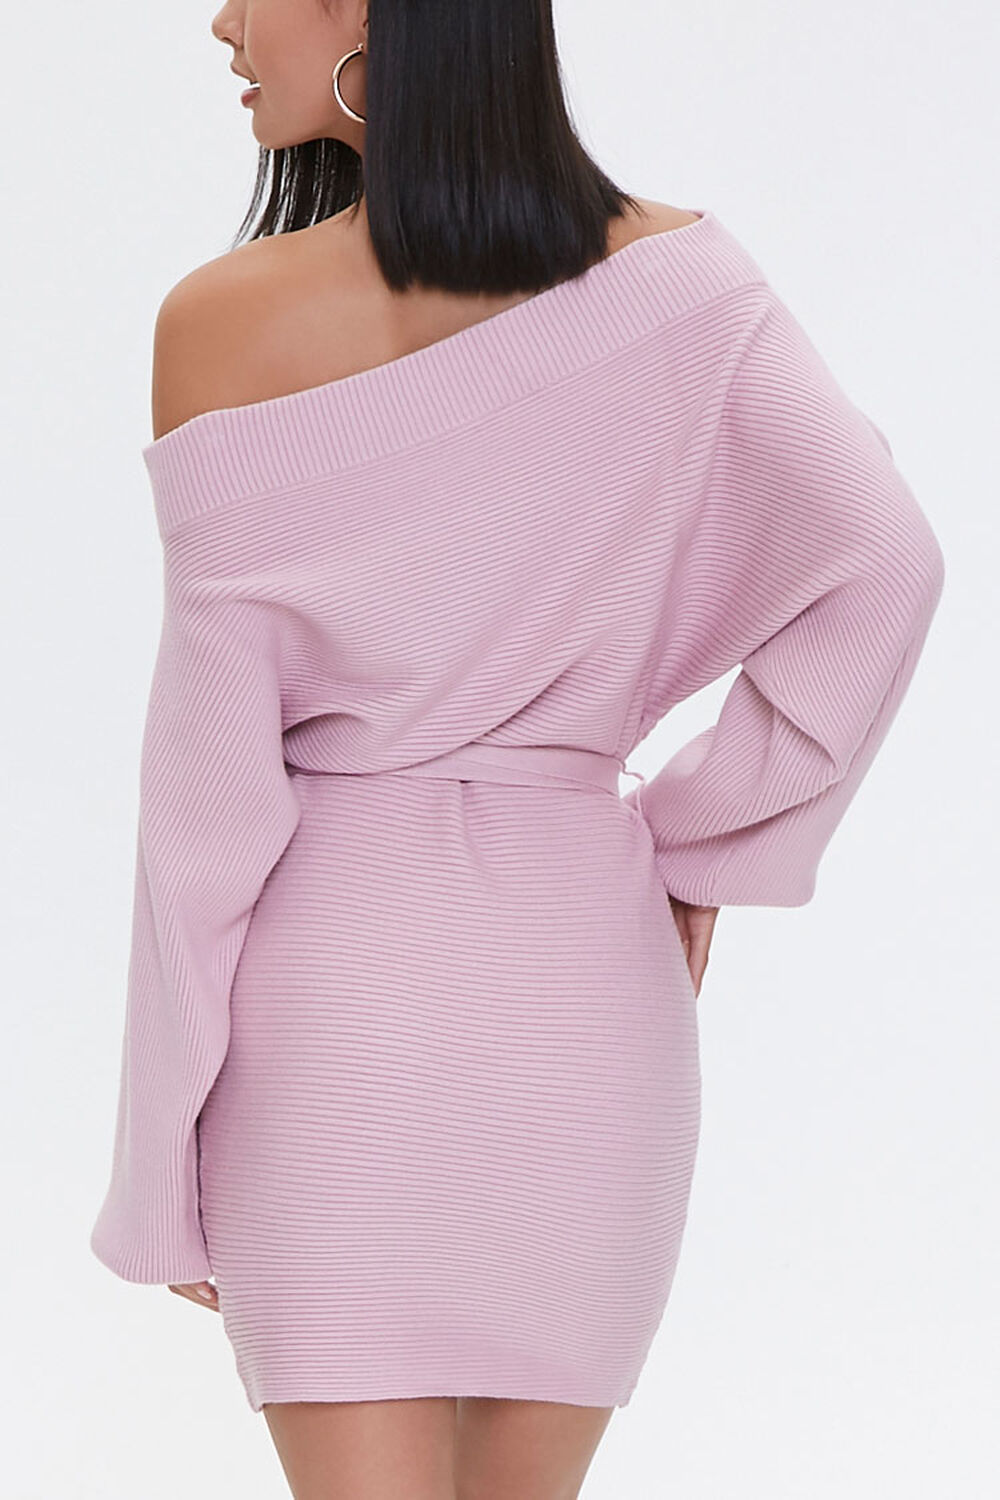 LILAC Off-the-Shoulder Sweater Dress, image 3